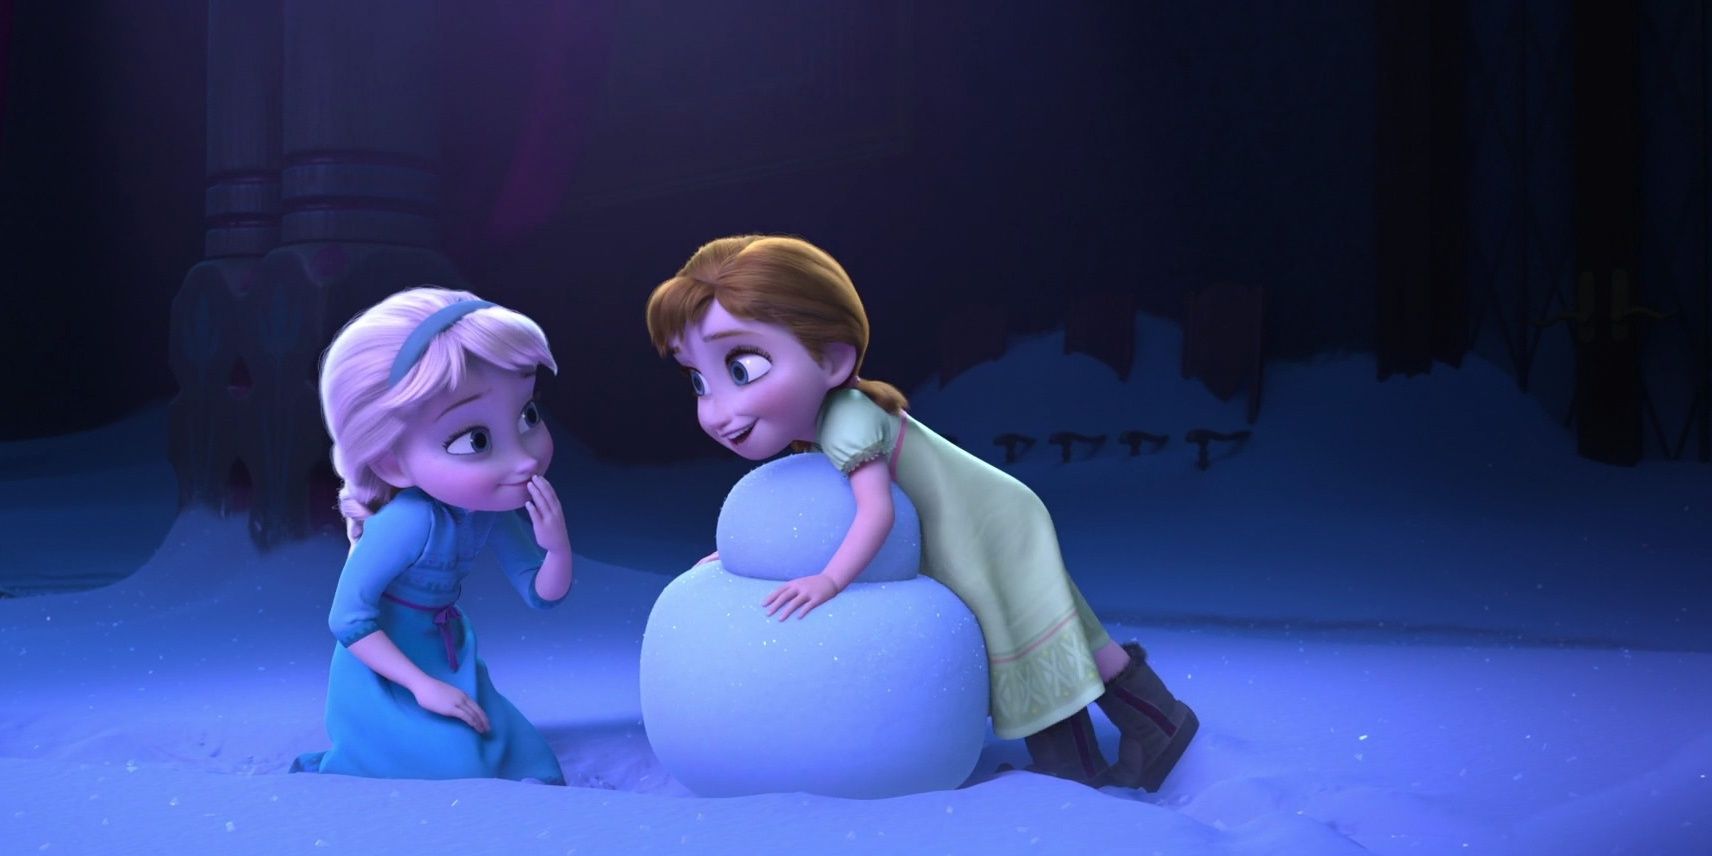 Disney 5 Greatest Quotes From Frozen (& 5 From Frozen 2)